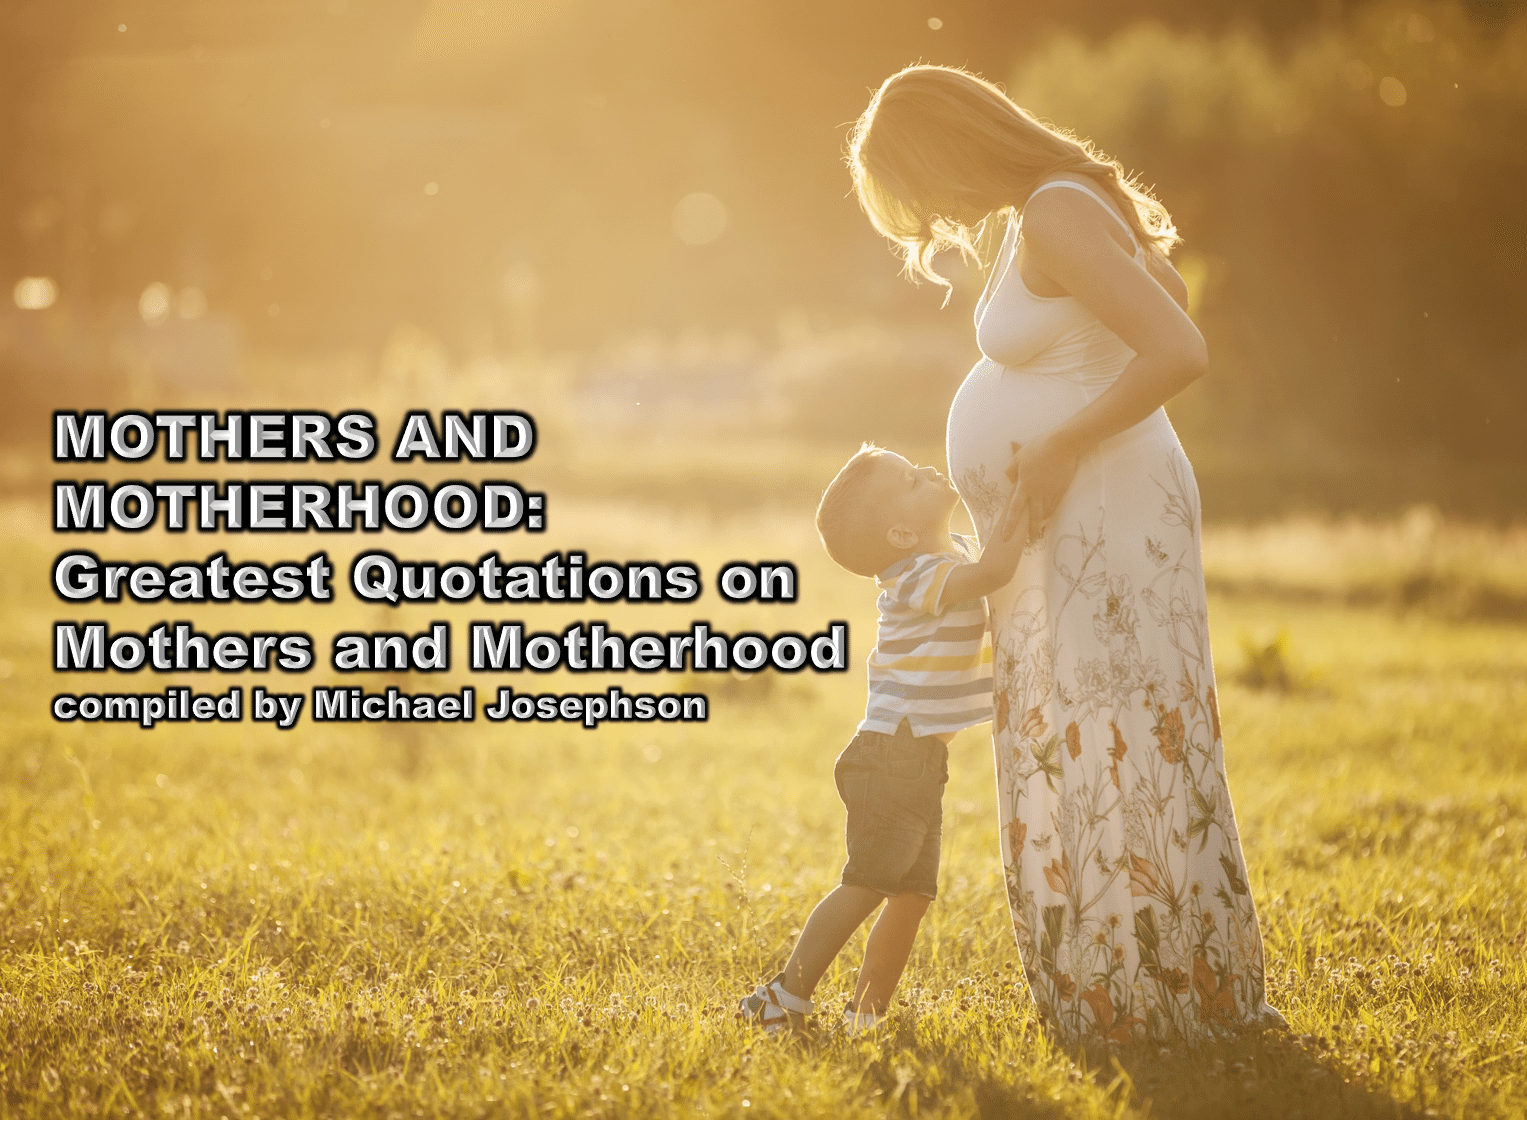 greatest-quotations-on-mothers-and-motherhood-what-will-matter